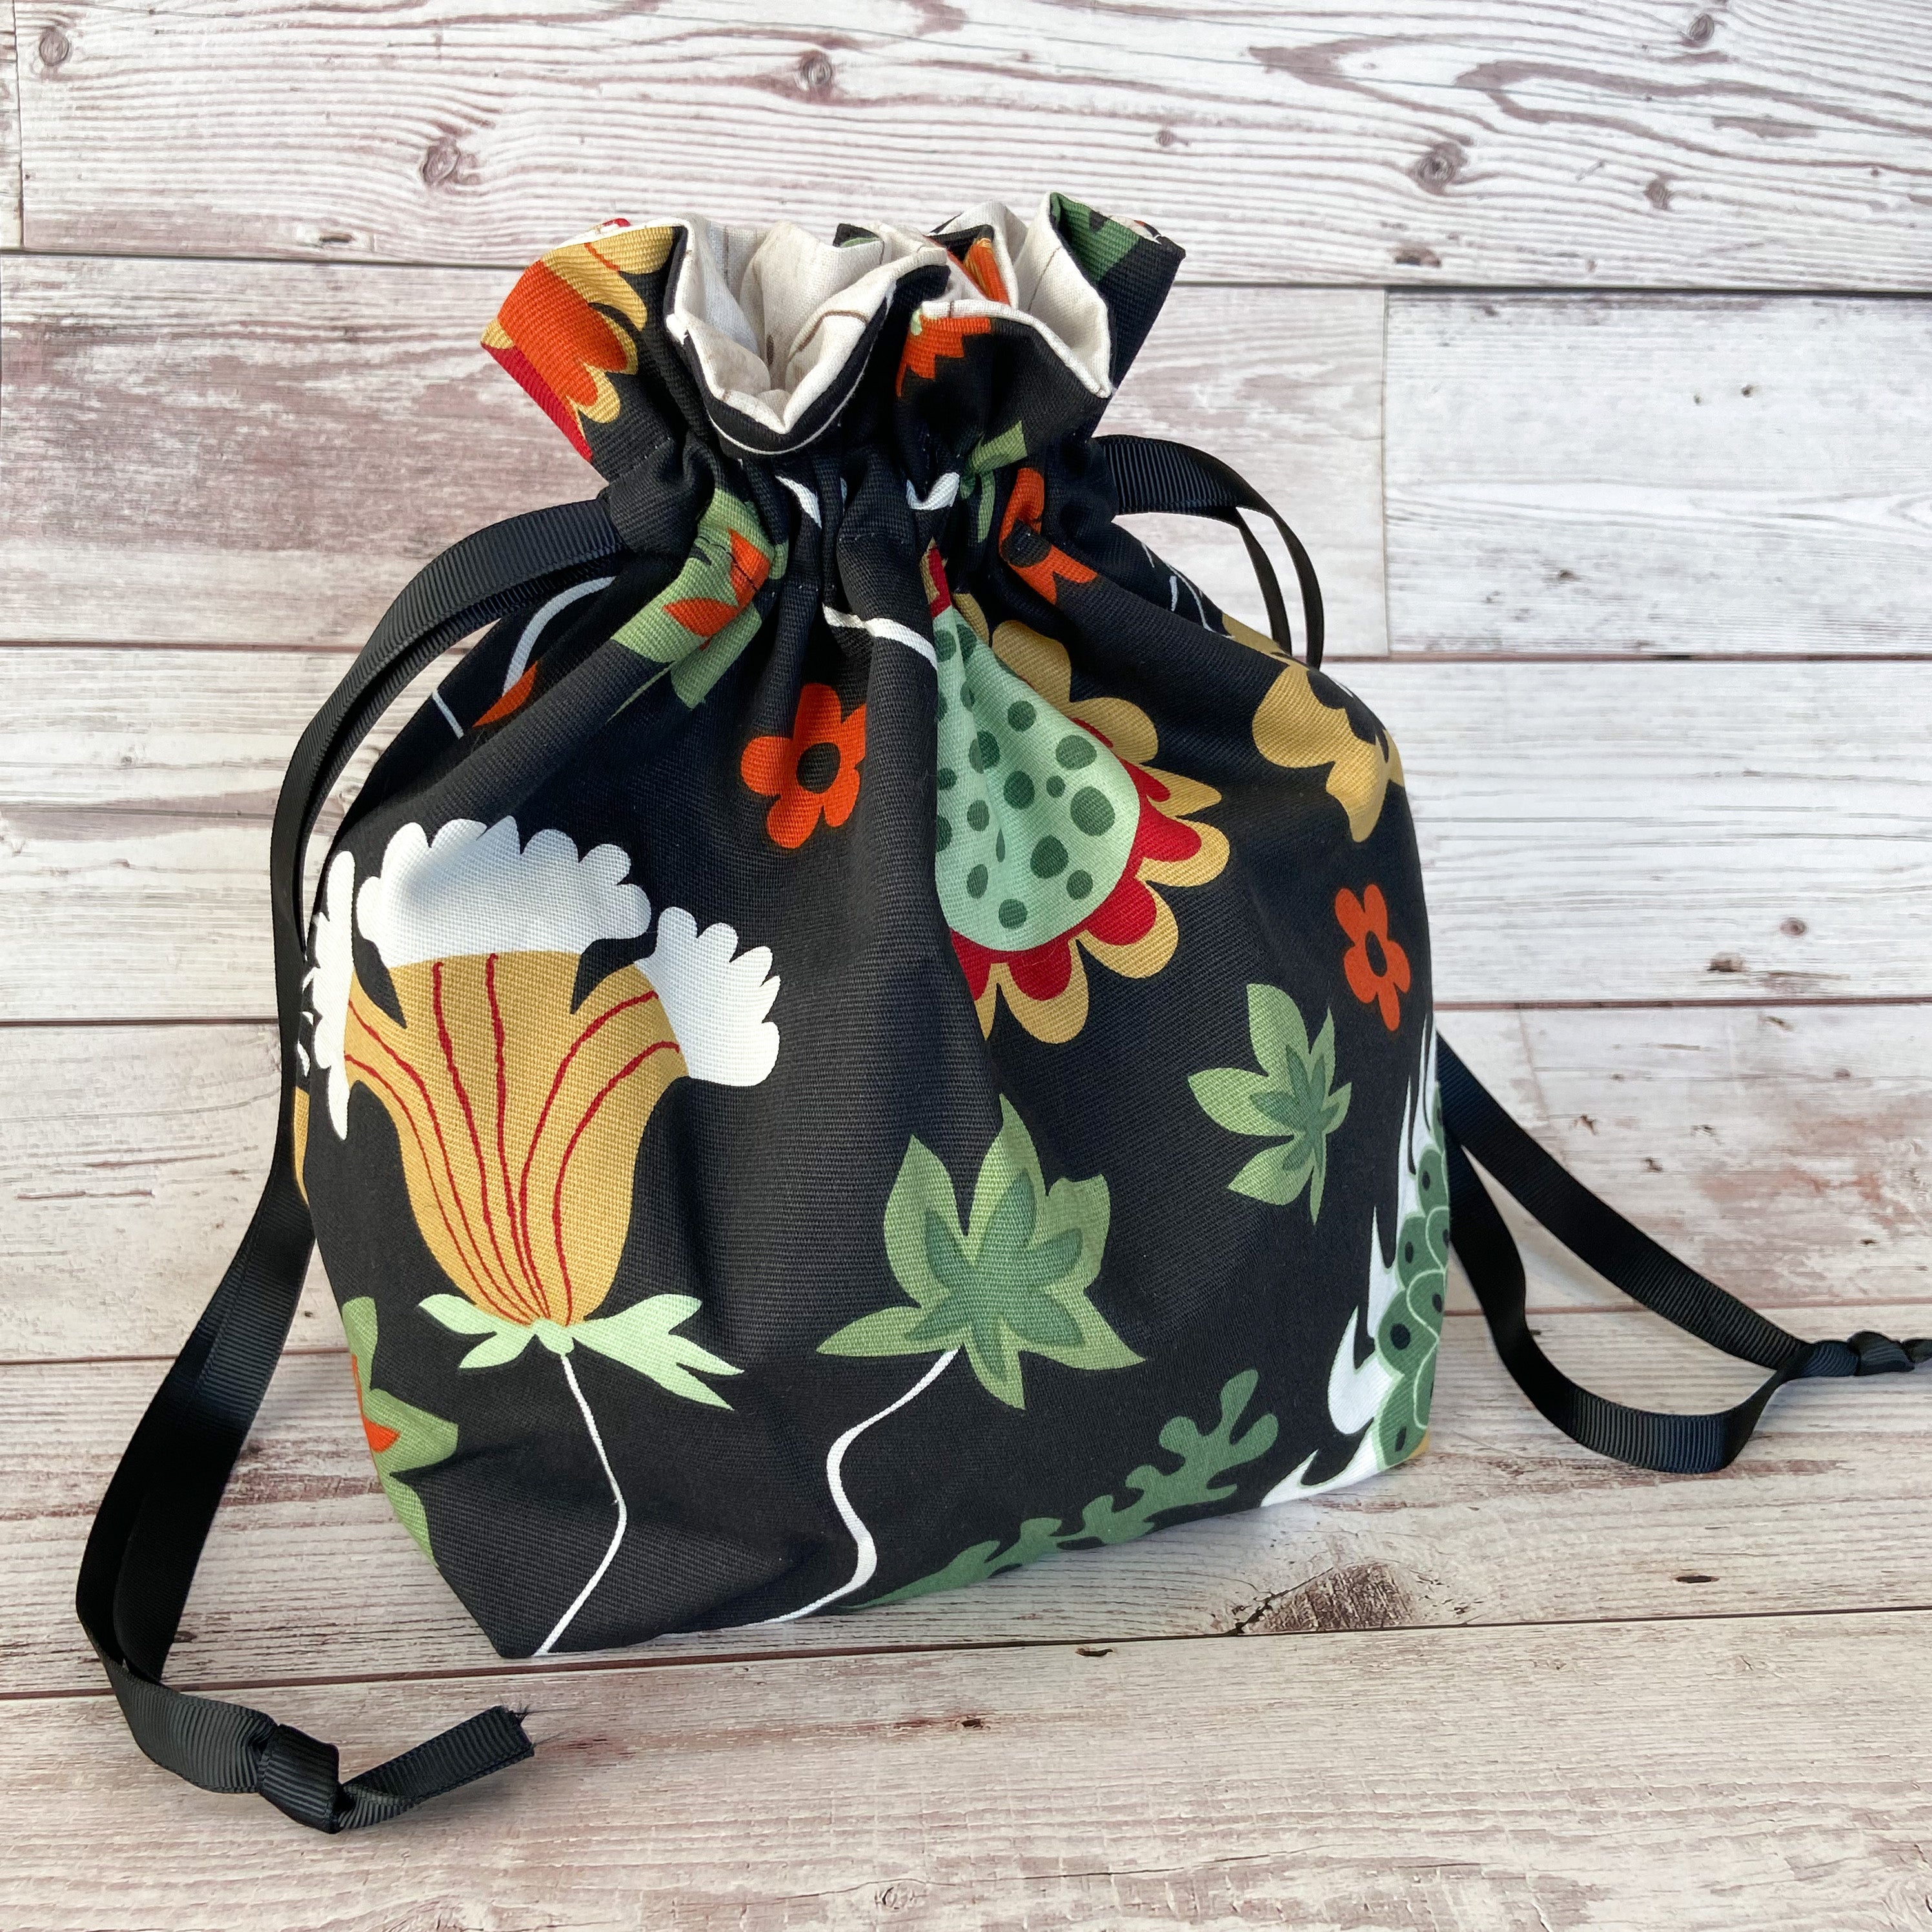 Small Drawstring Bag - Black with Large Floral Print